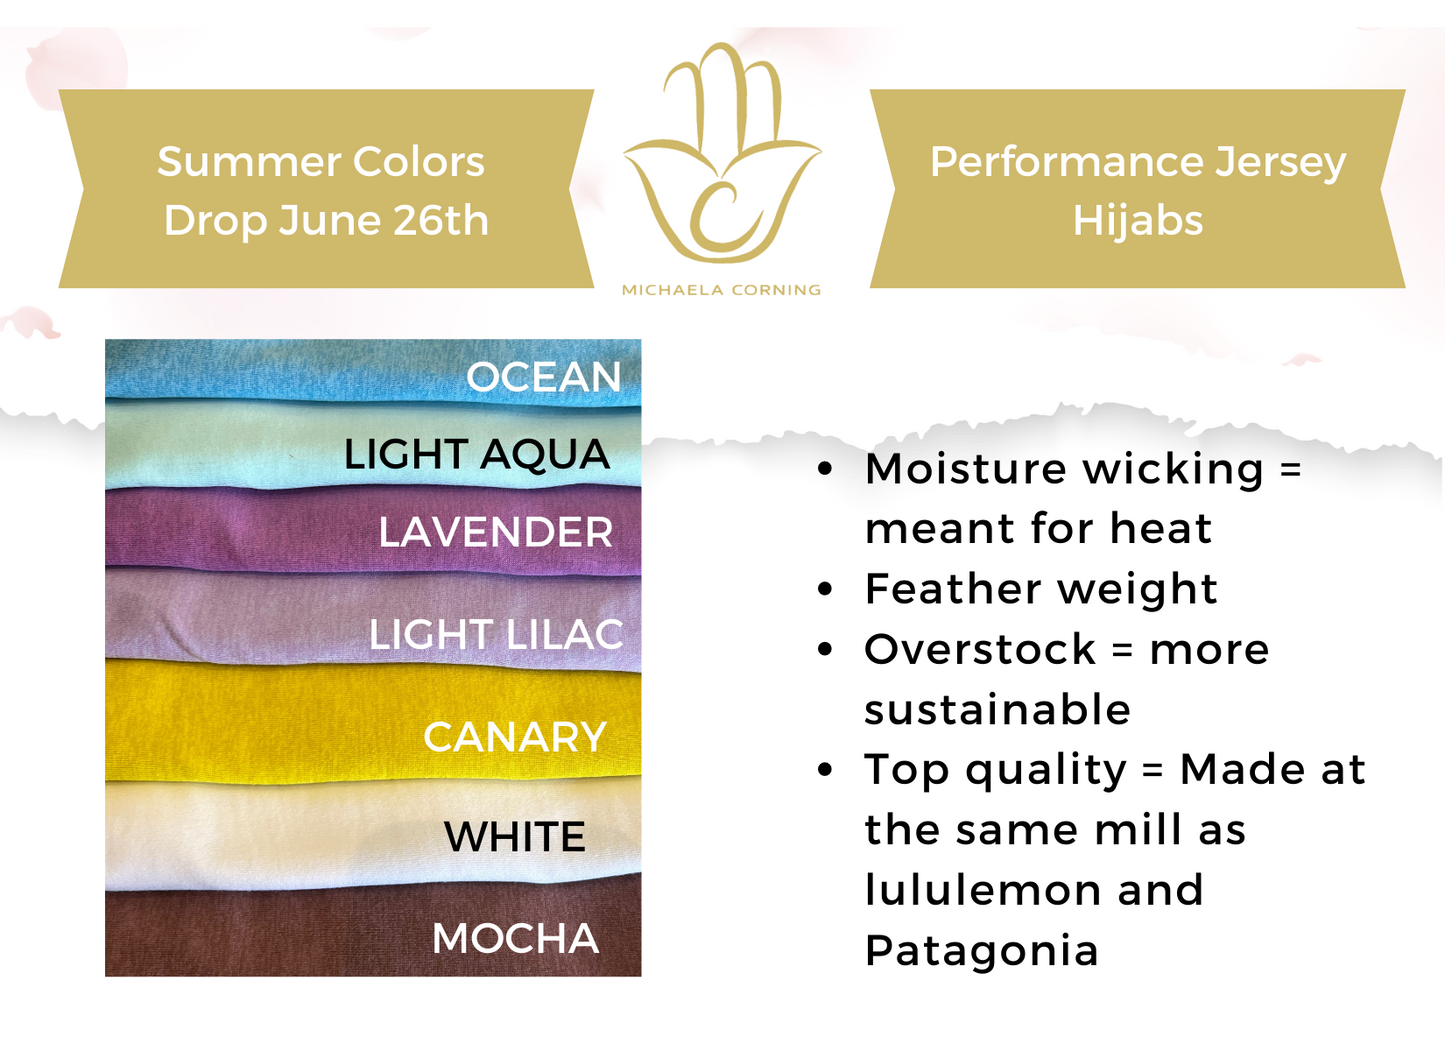 Performance Jersey Hijab: Pearly White